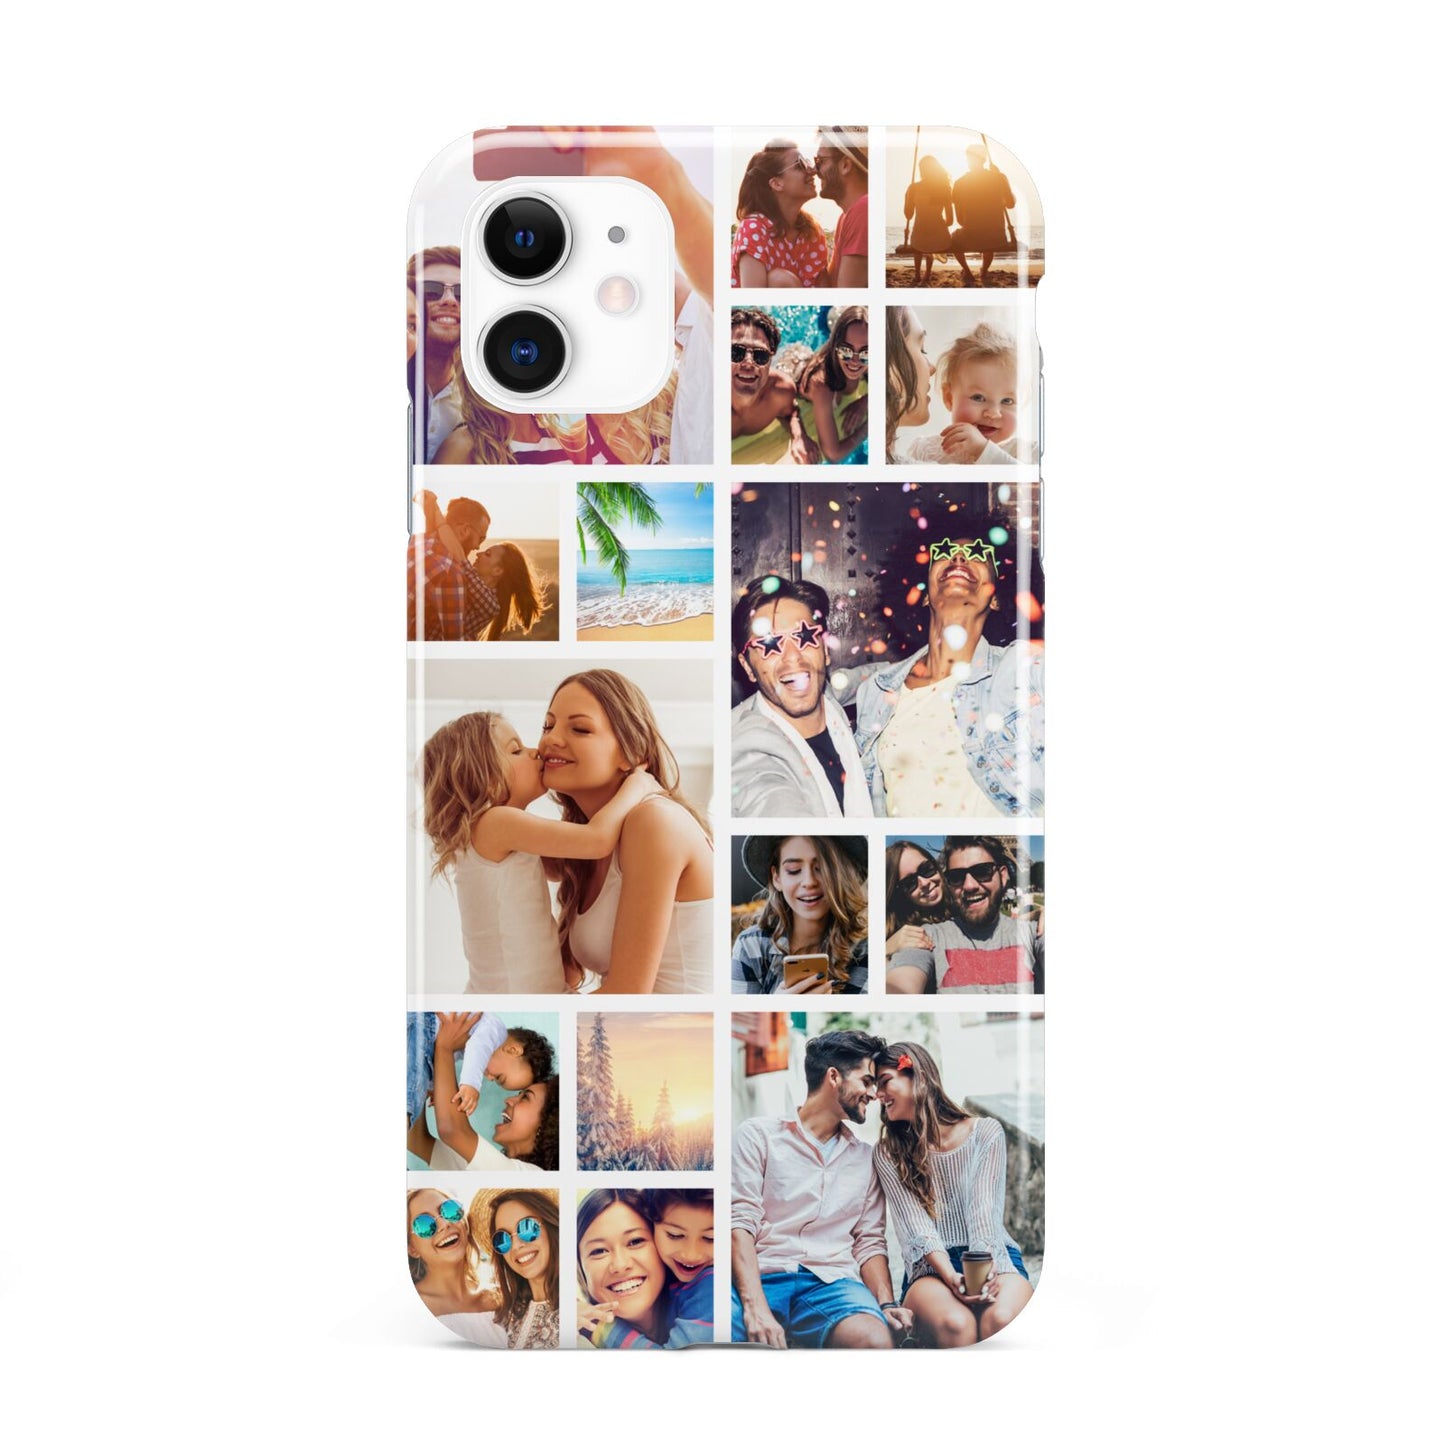 Abstract Multi Tile Photo Montage Upload iPhone 11 3D Tough Case